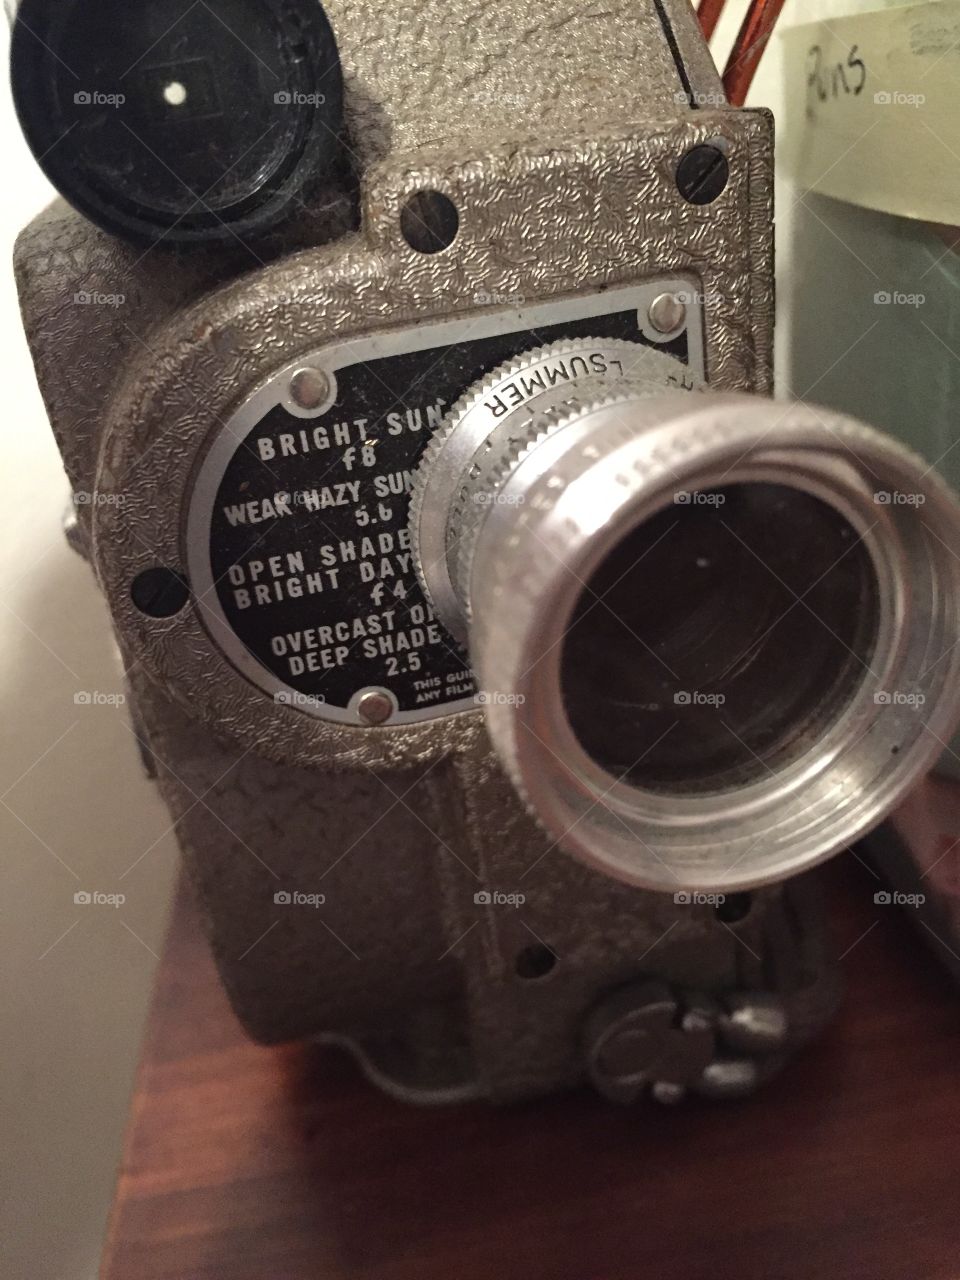 Very old vintage camera  in collection of cameras and movie paraphalia. 